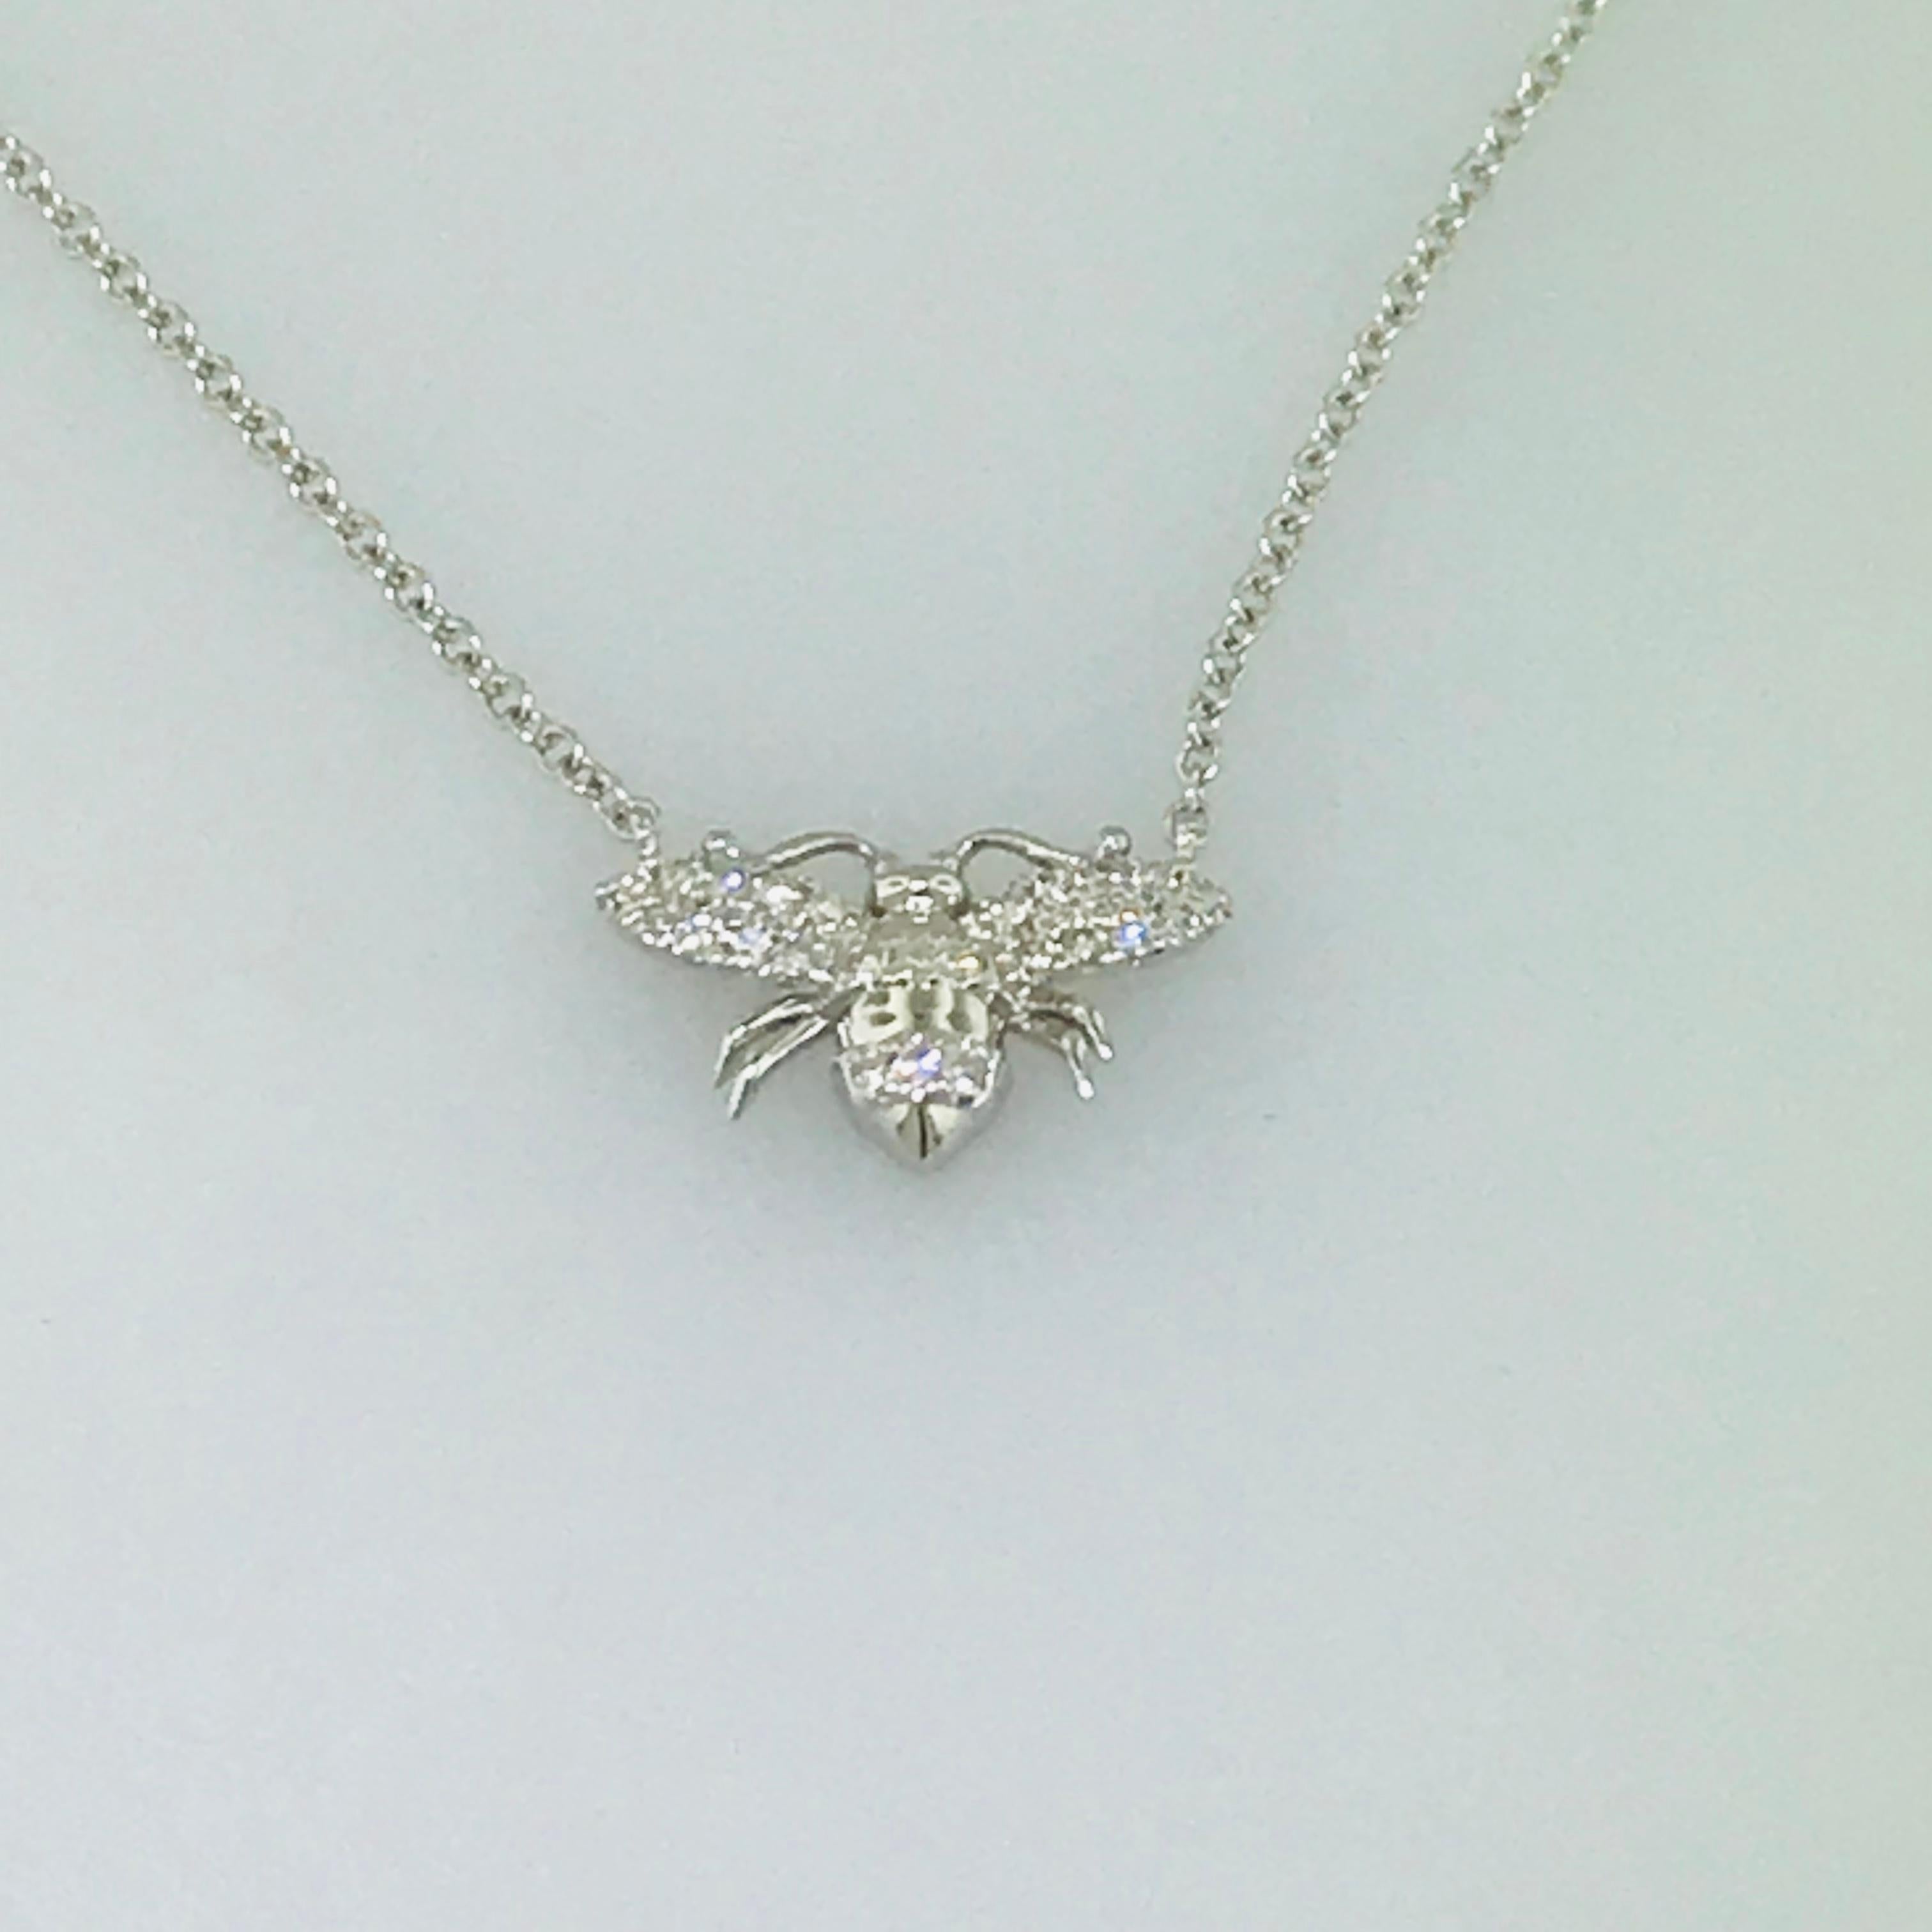 How cute is this diamond bee necklace? It is truly “bee-utiful”! What a great piece to wear everyday or a great gift for someone special. This adorable diamond bee necklace has personality and bling! The bee 1.4 inch wide and sits nicely alone or